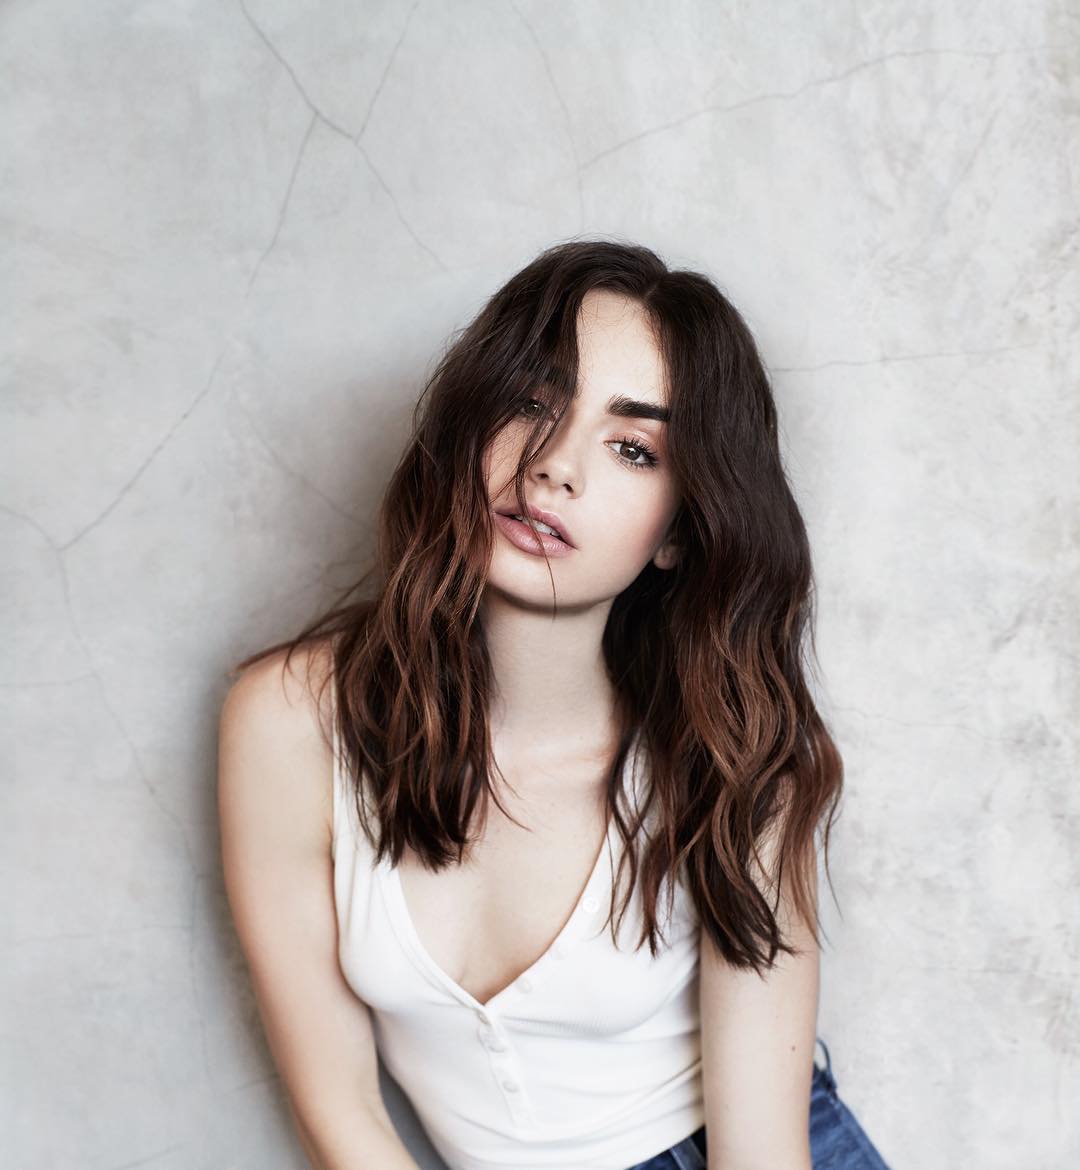 75+ Hot Pictures Of Lily Collins Are Like A Slice Of Heaven On Earth | Best Of Comic Books